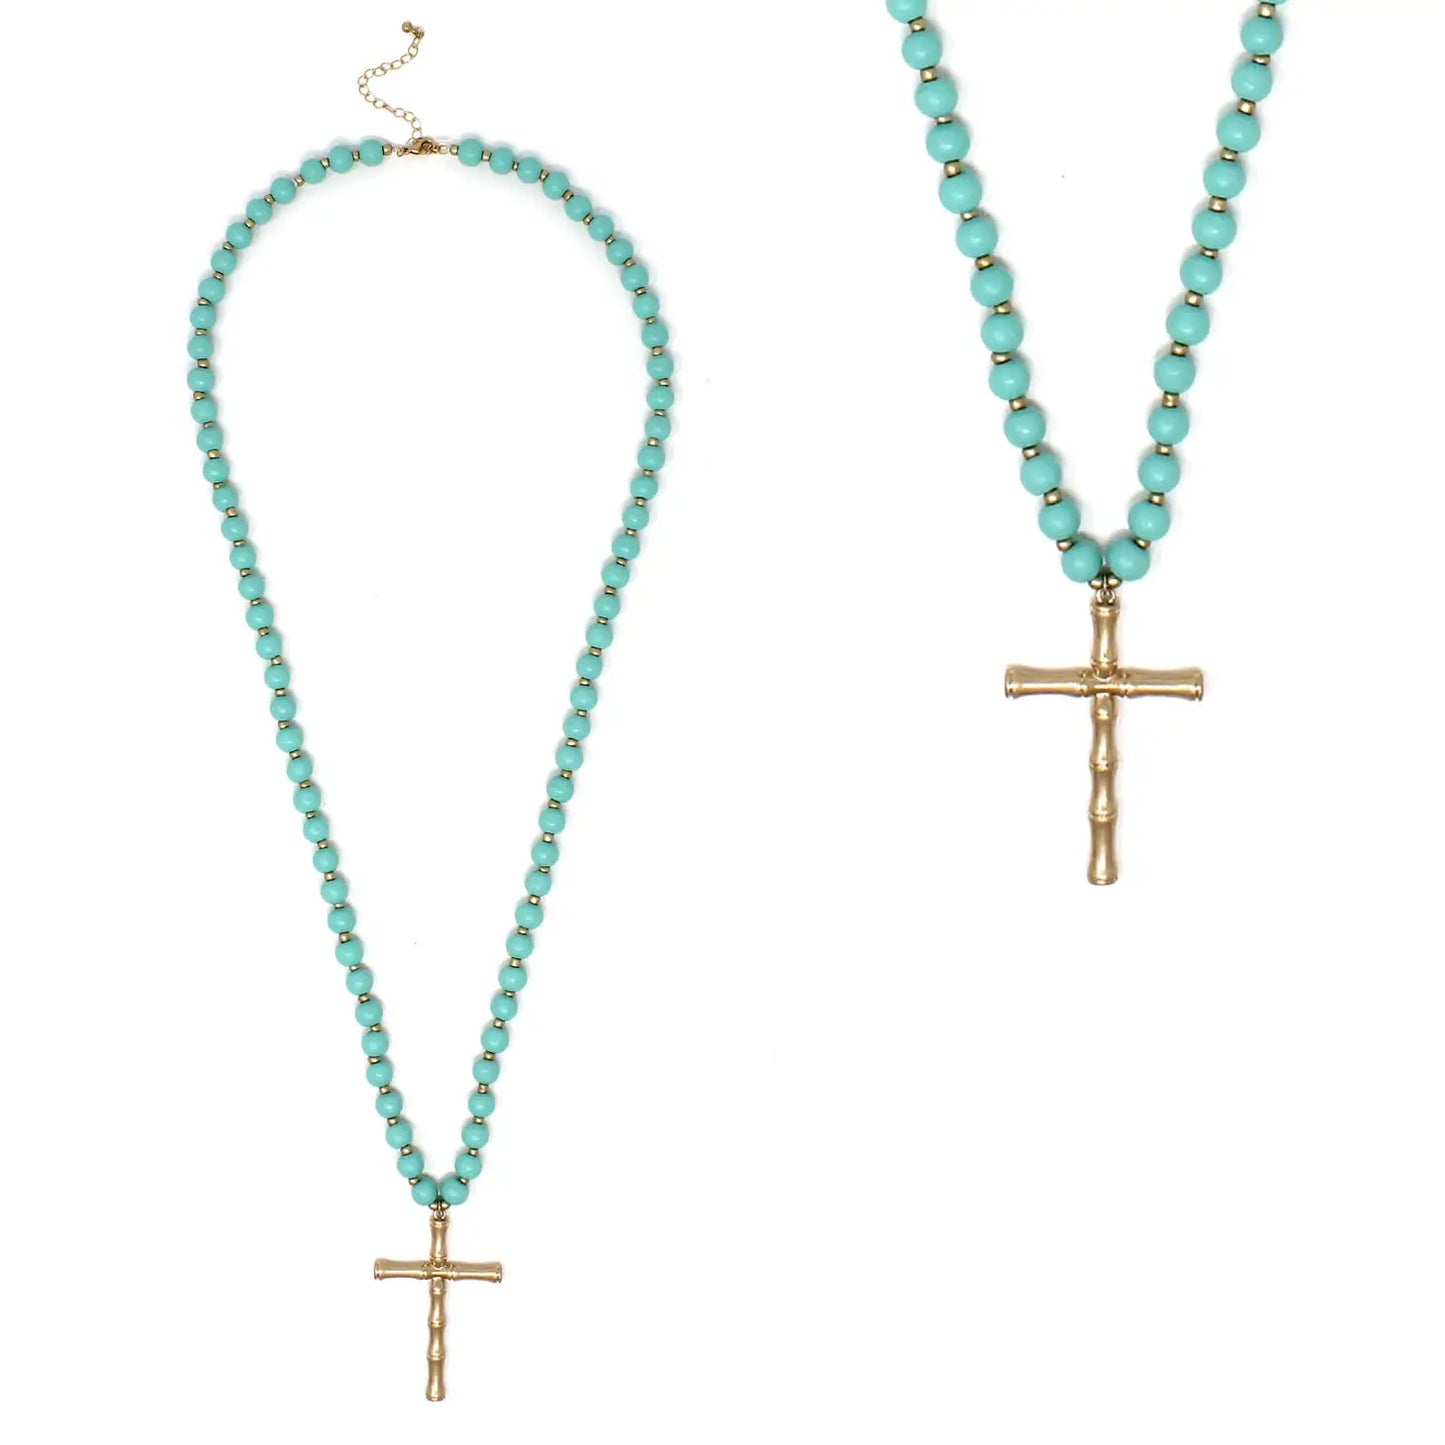 The Crown Cross Necklace